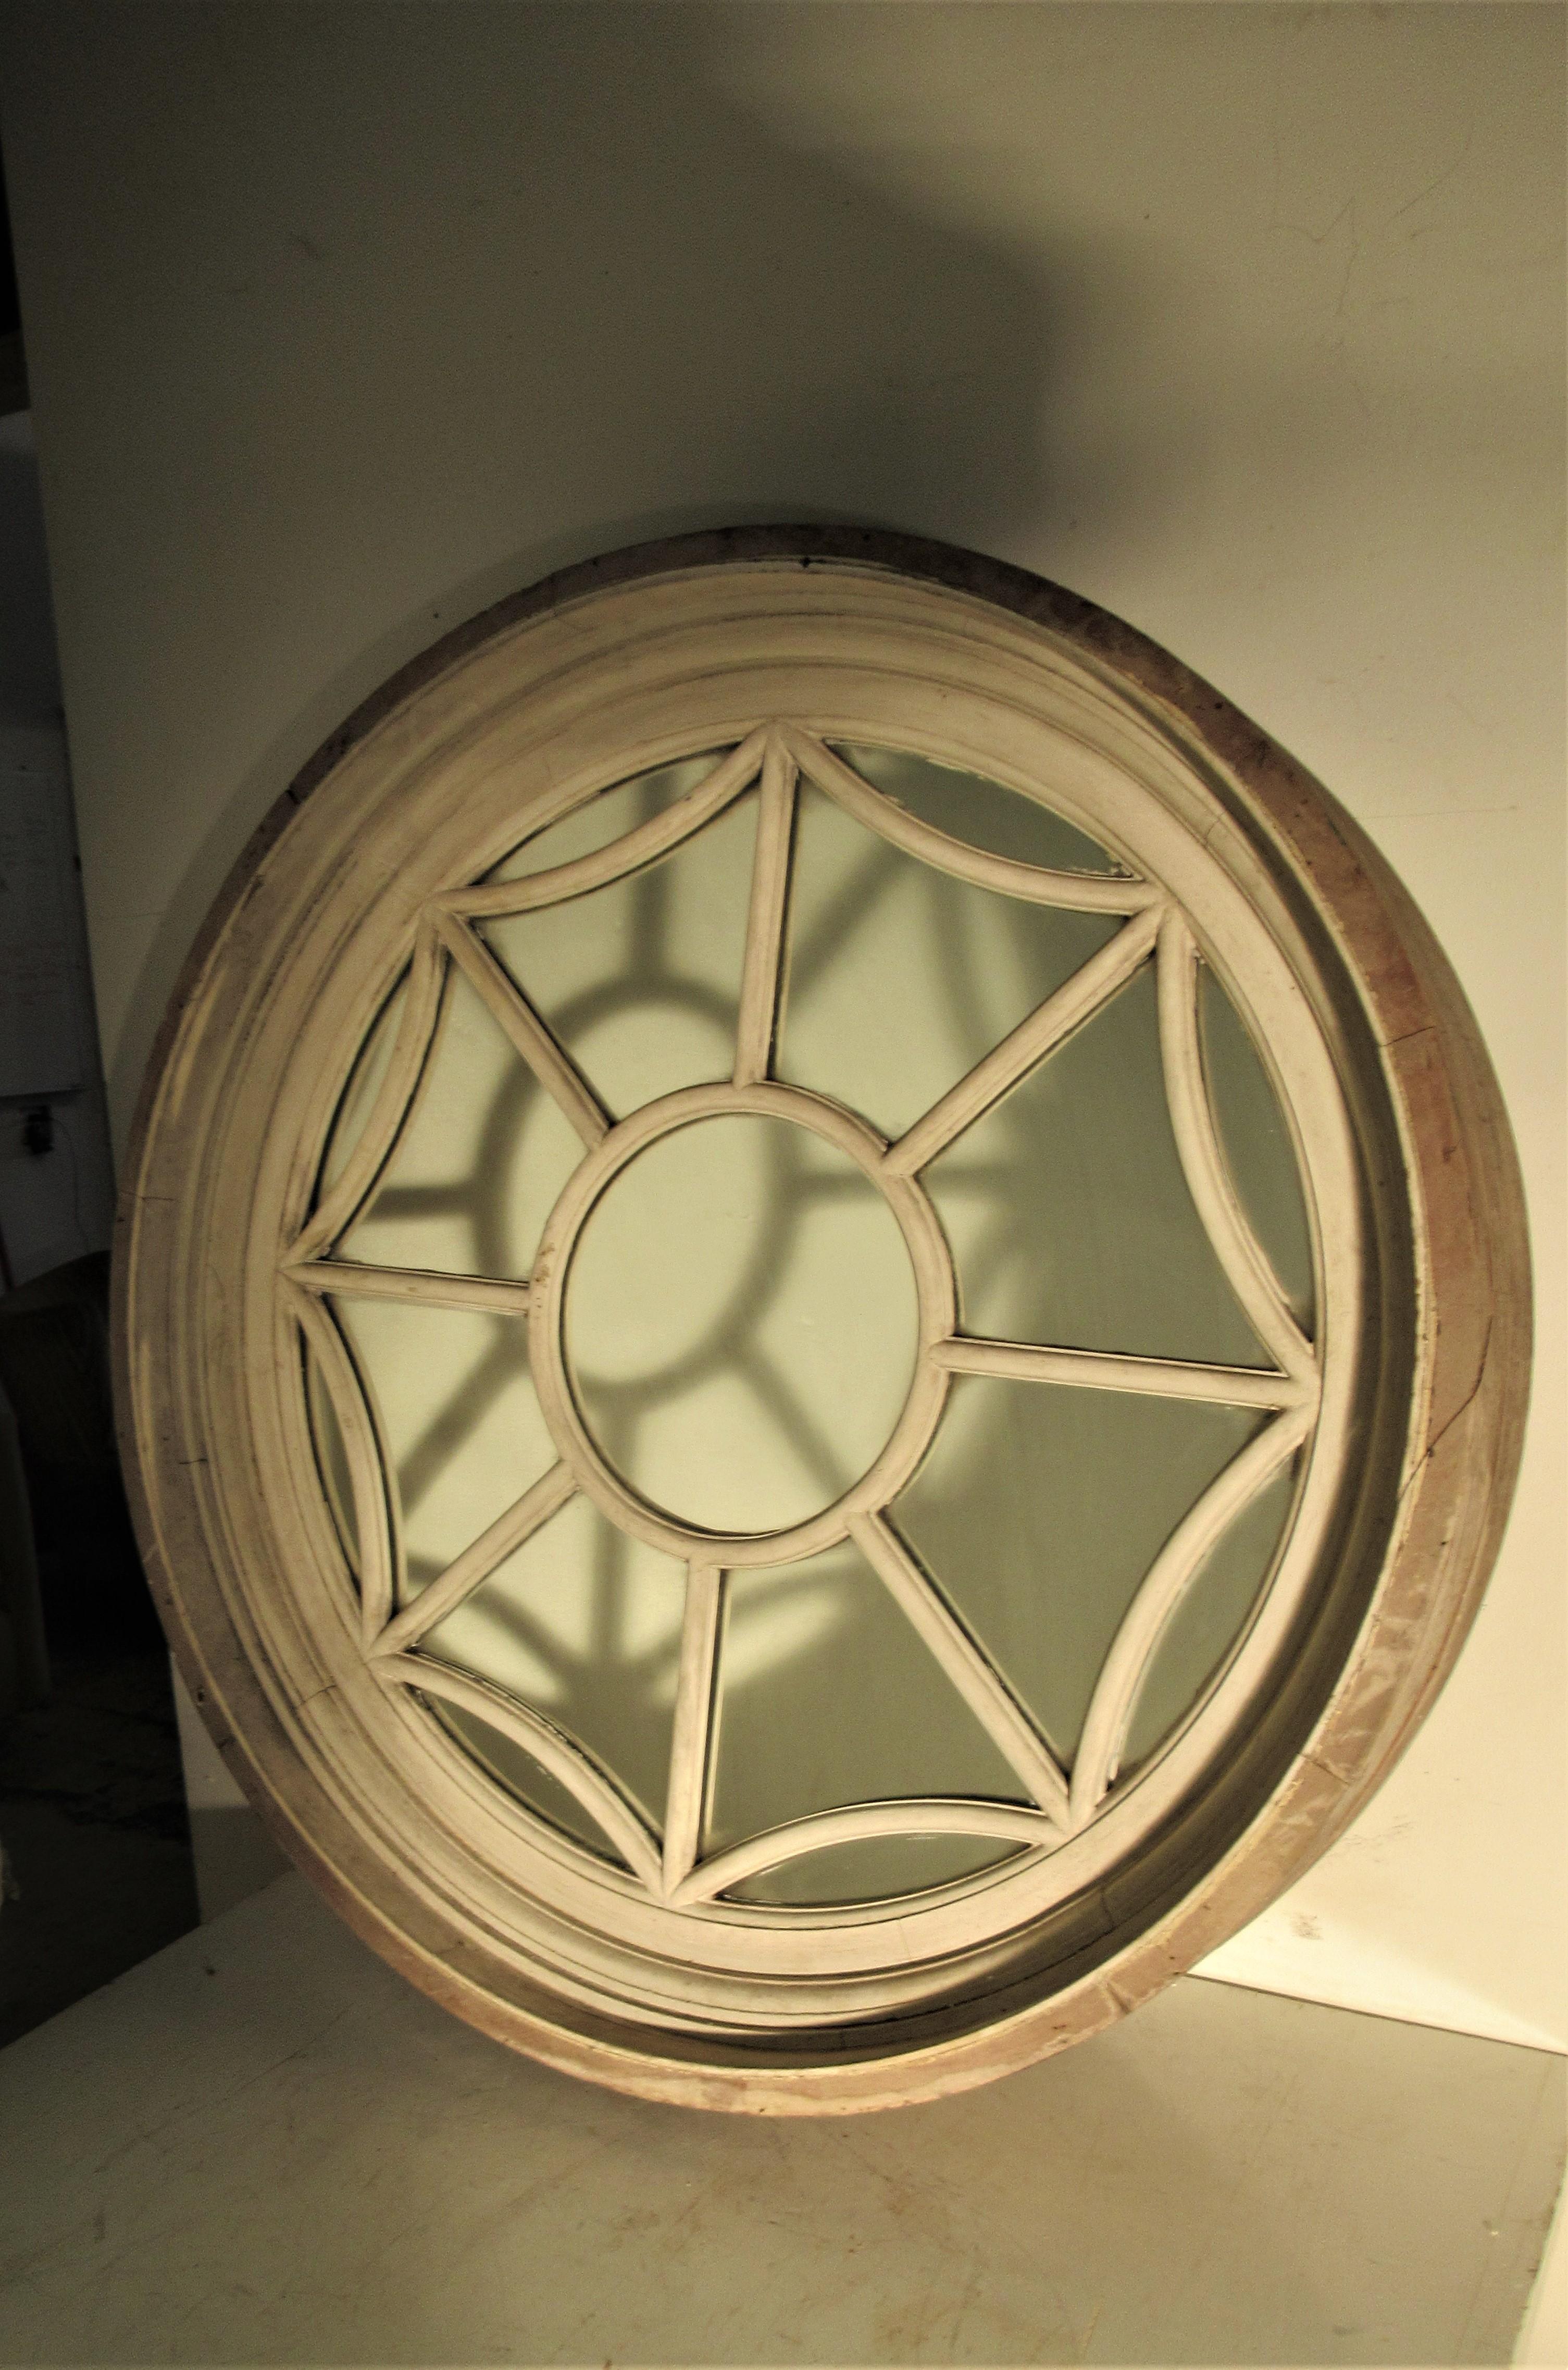 Antique large and deep architectural spider web window with mirror in beautifully aged old cream white painted surface. The old mirror glass is nicely oxidized. American, 19th century. See all pictures and read condition report in comment section.